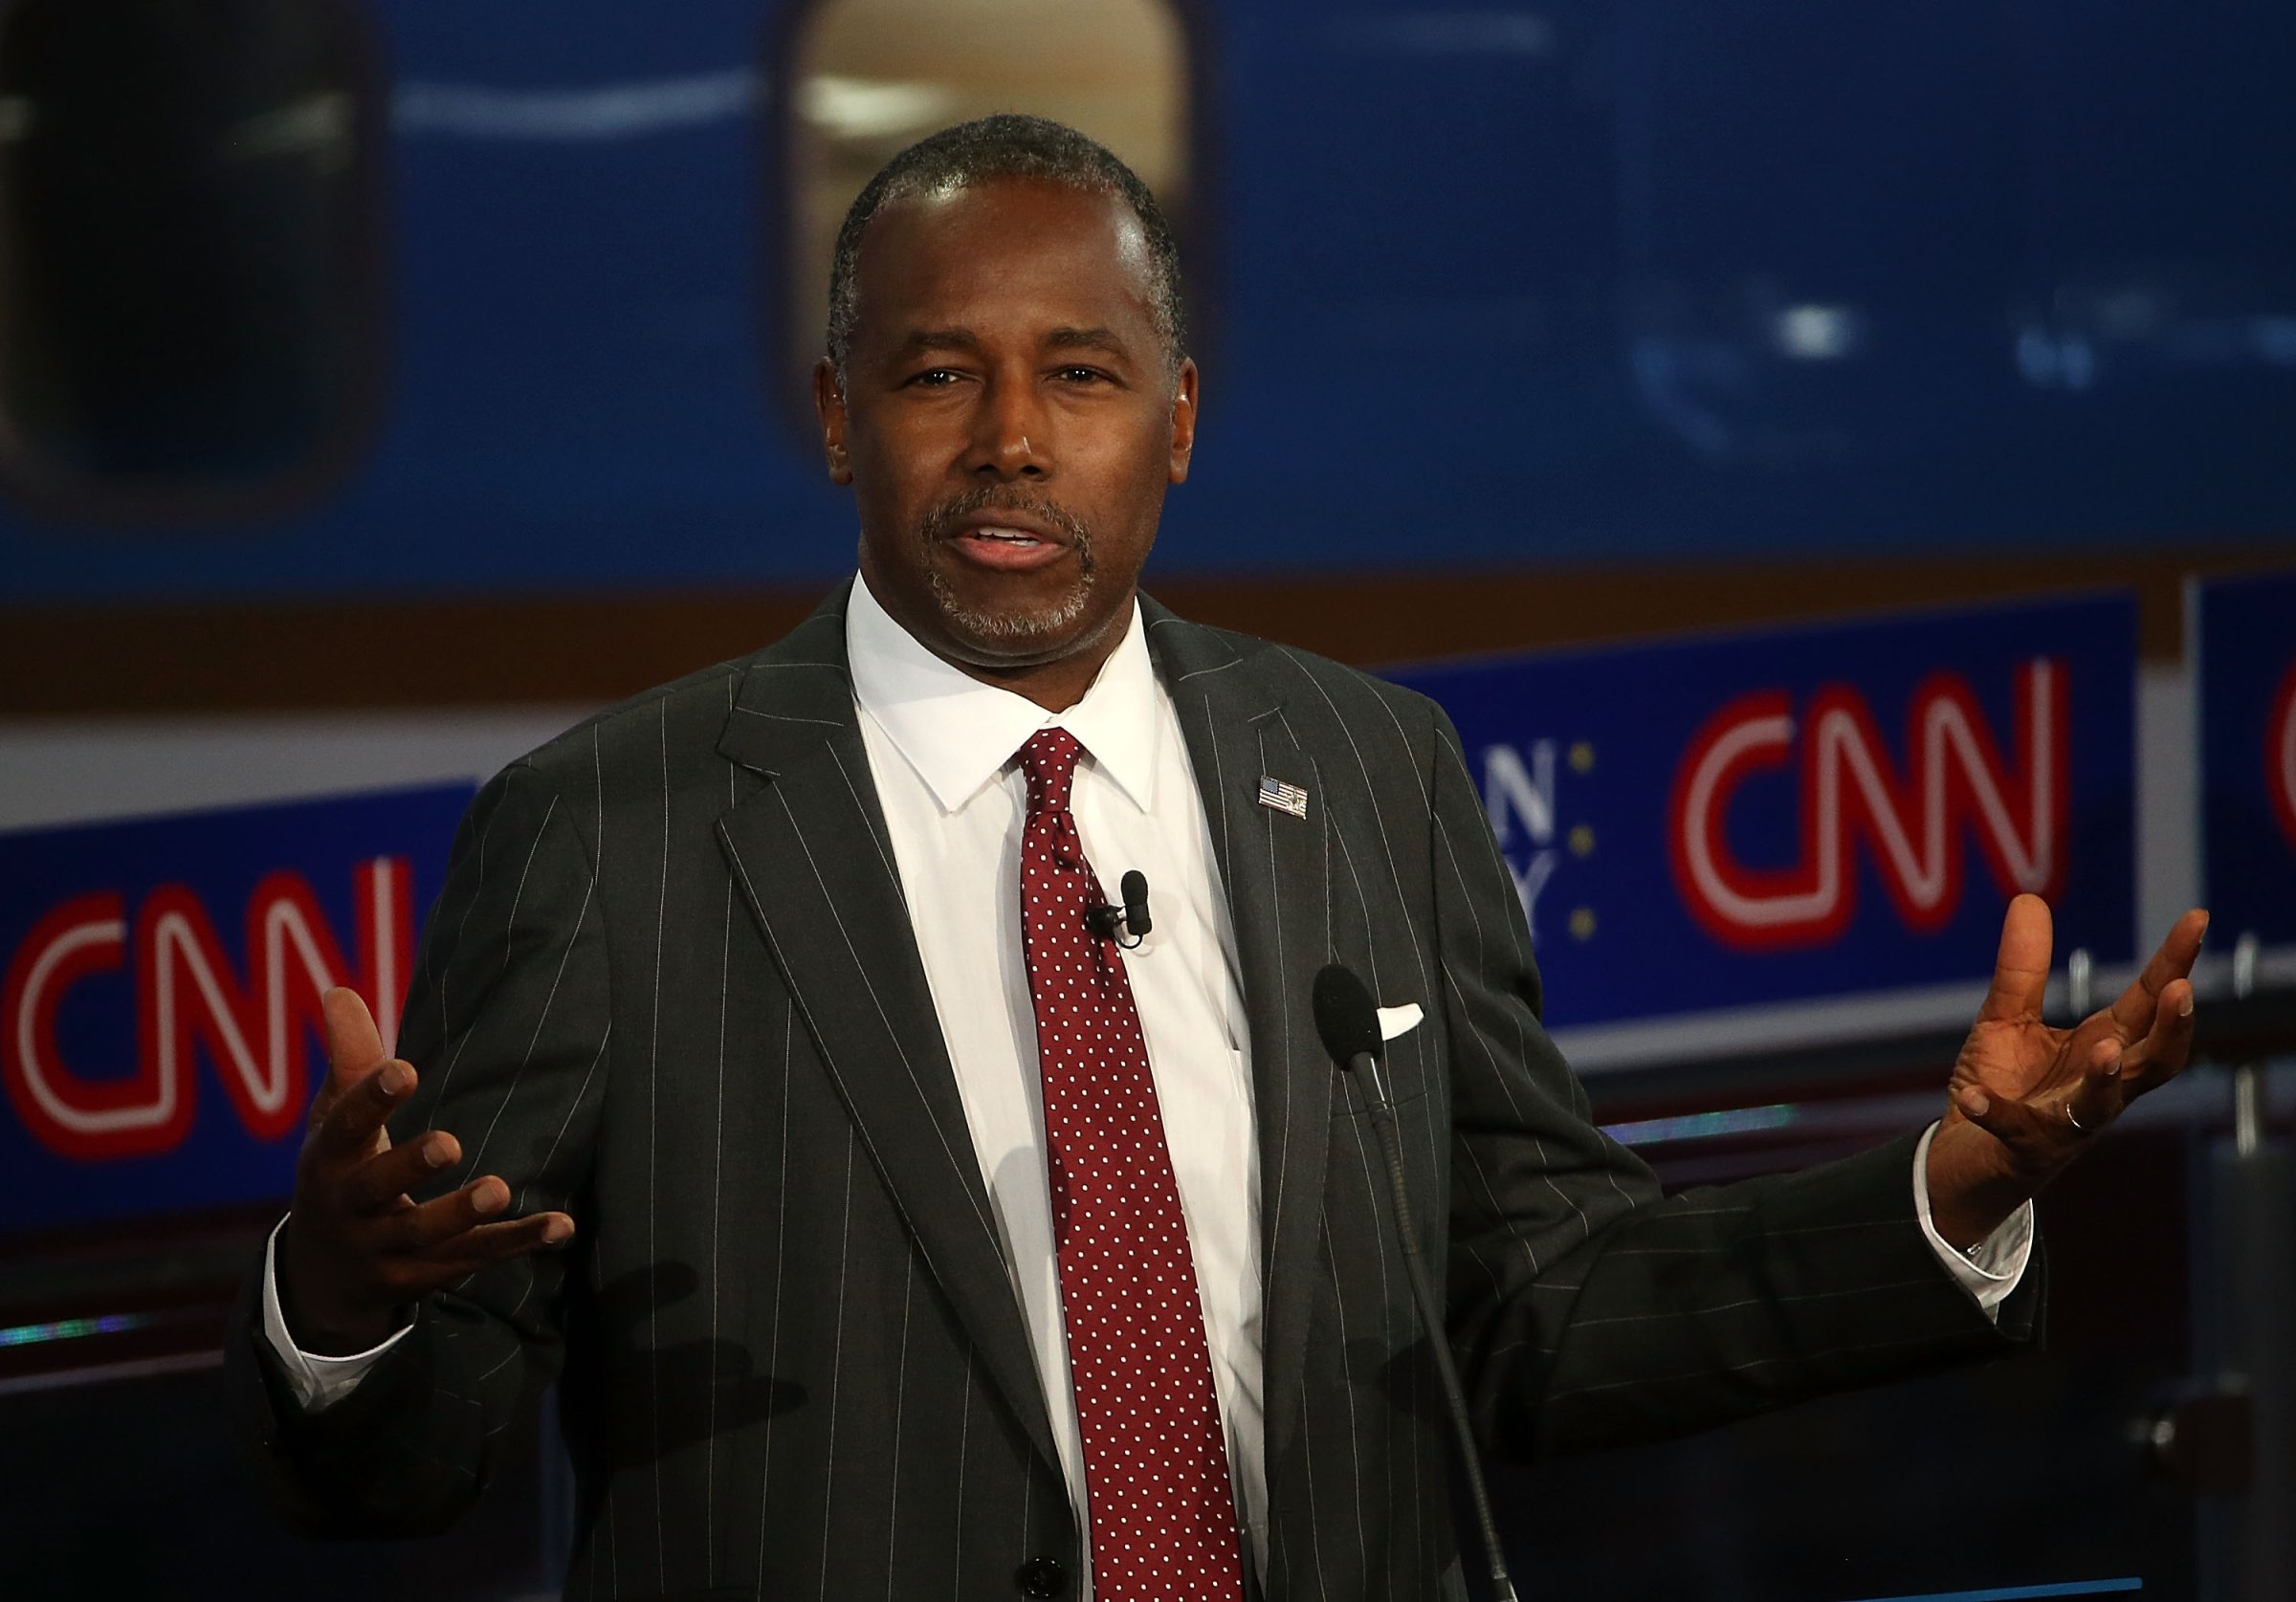 Republican presidential candidate Ben Carson takes part in the presidential debates at the Reagan Library in Simi Valley, California on Sept. 16, 2015.